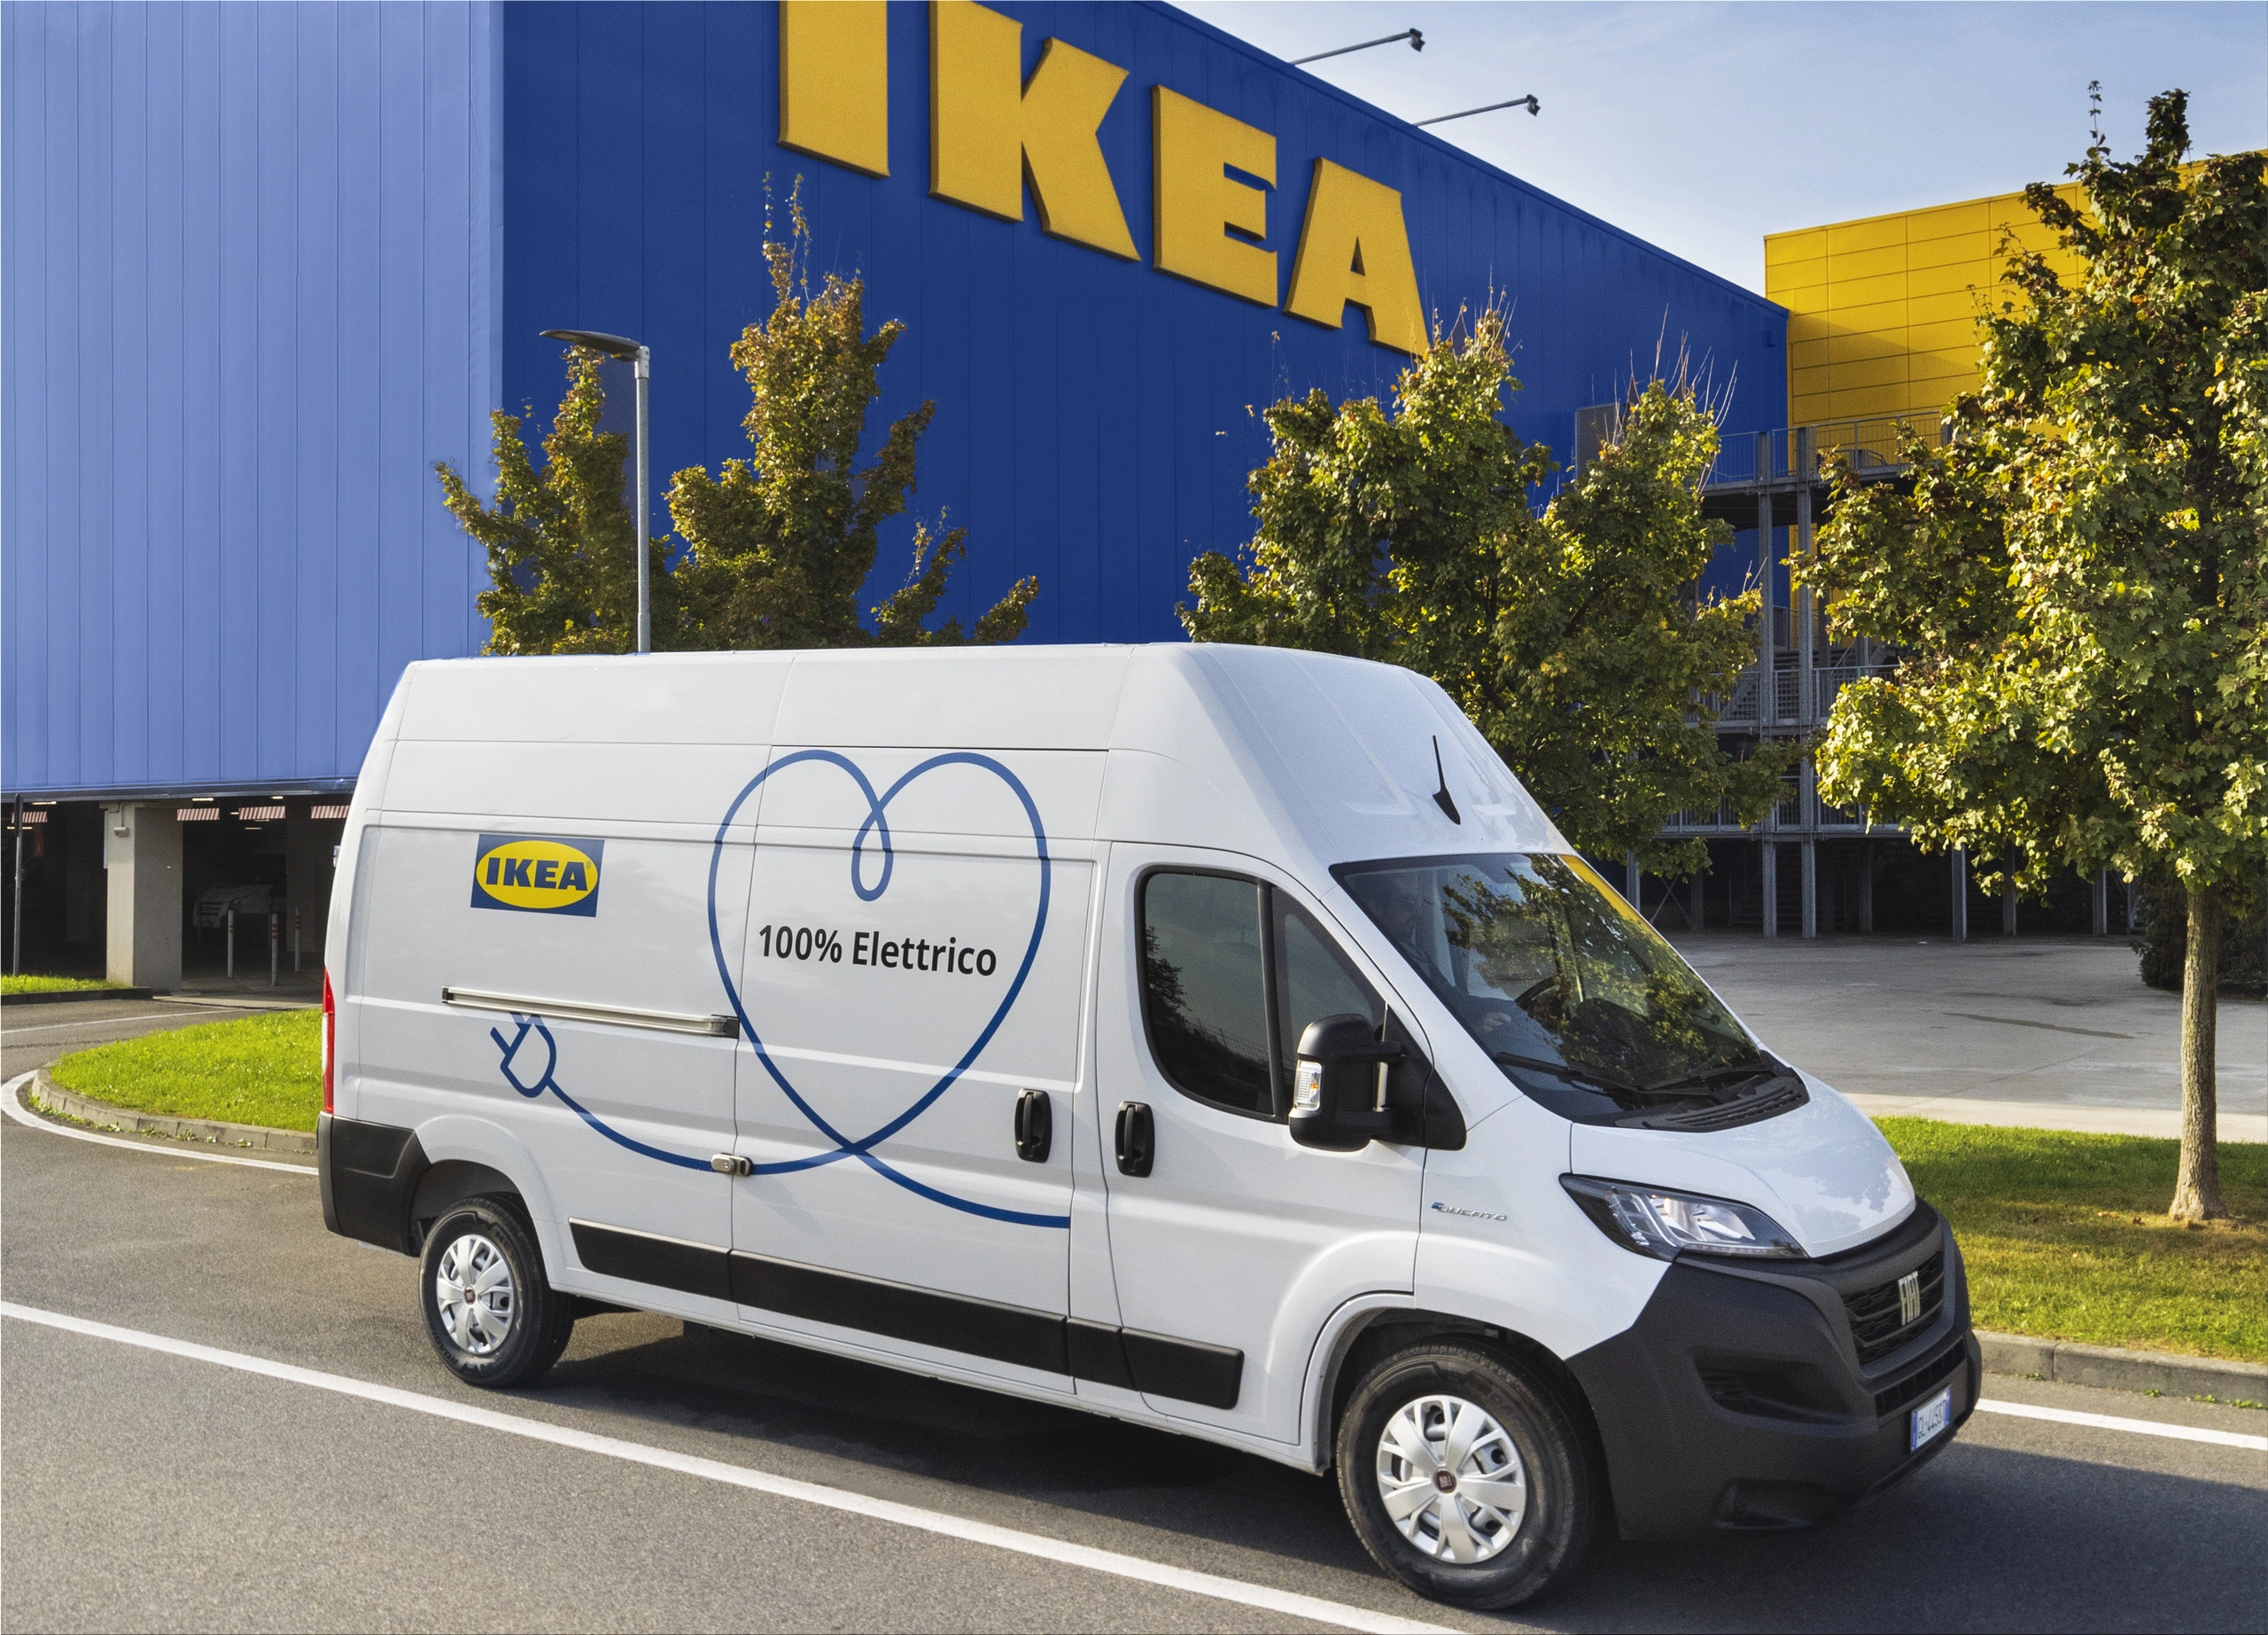 Fiat aids IKEA in the toward sustainable mobility | EV Stories